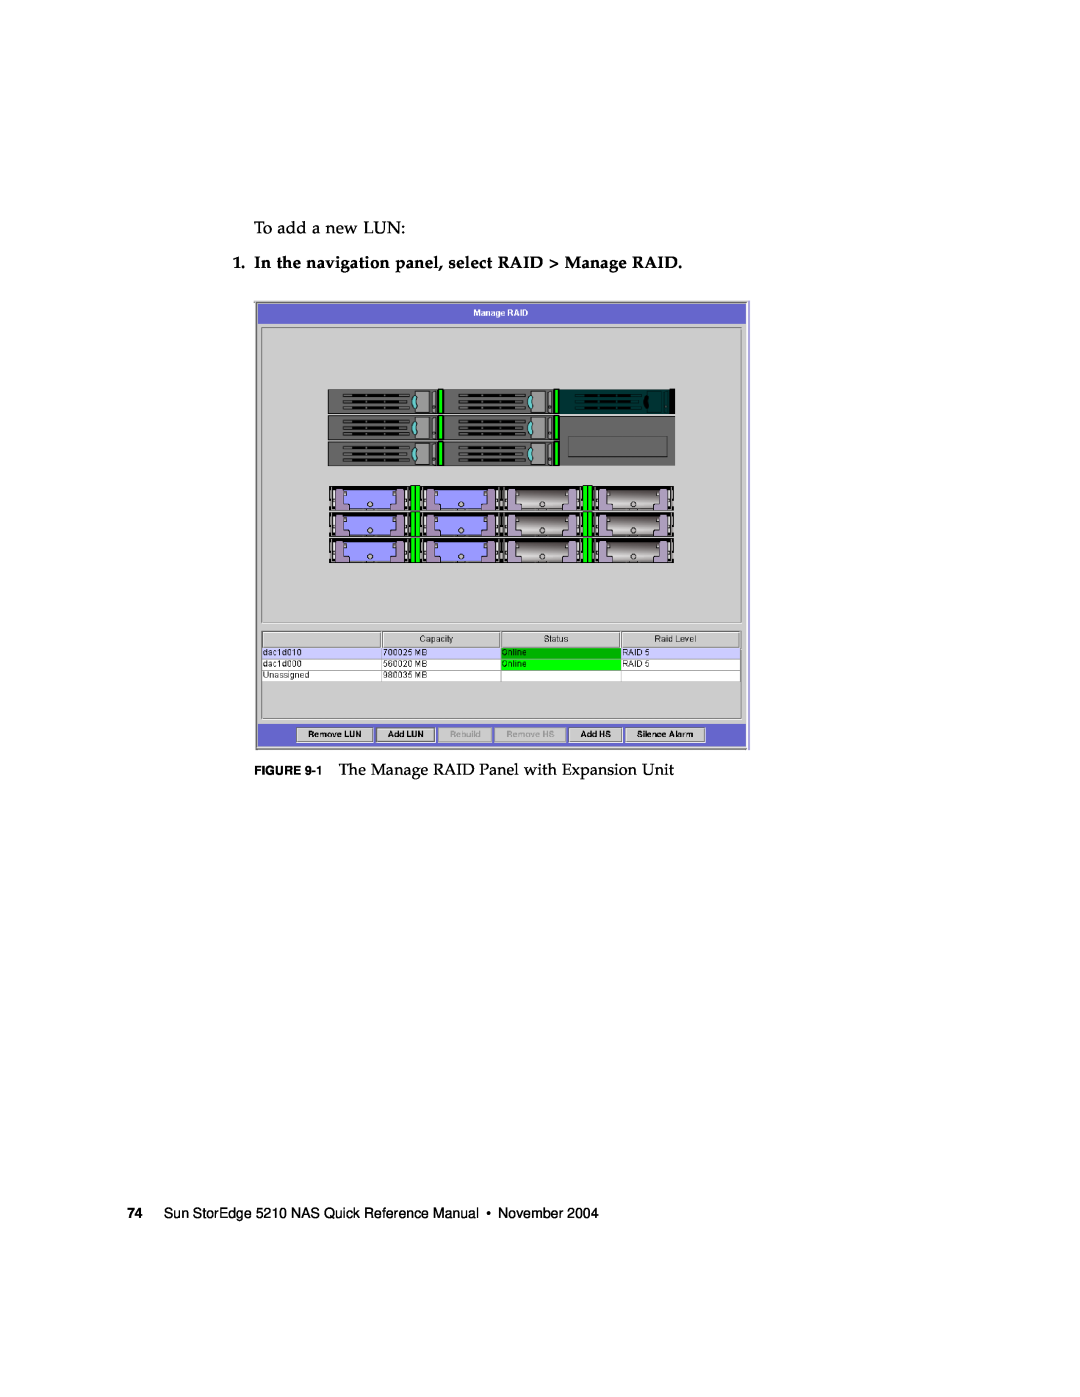 Sun Microsystems 5210 NAS manual To add a new LUN, In the navigation panel, select RAID Manage RAID 